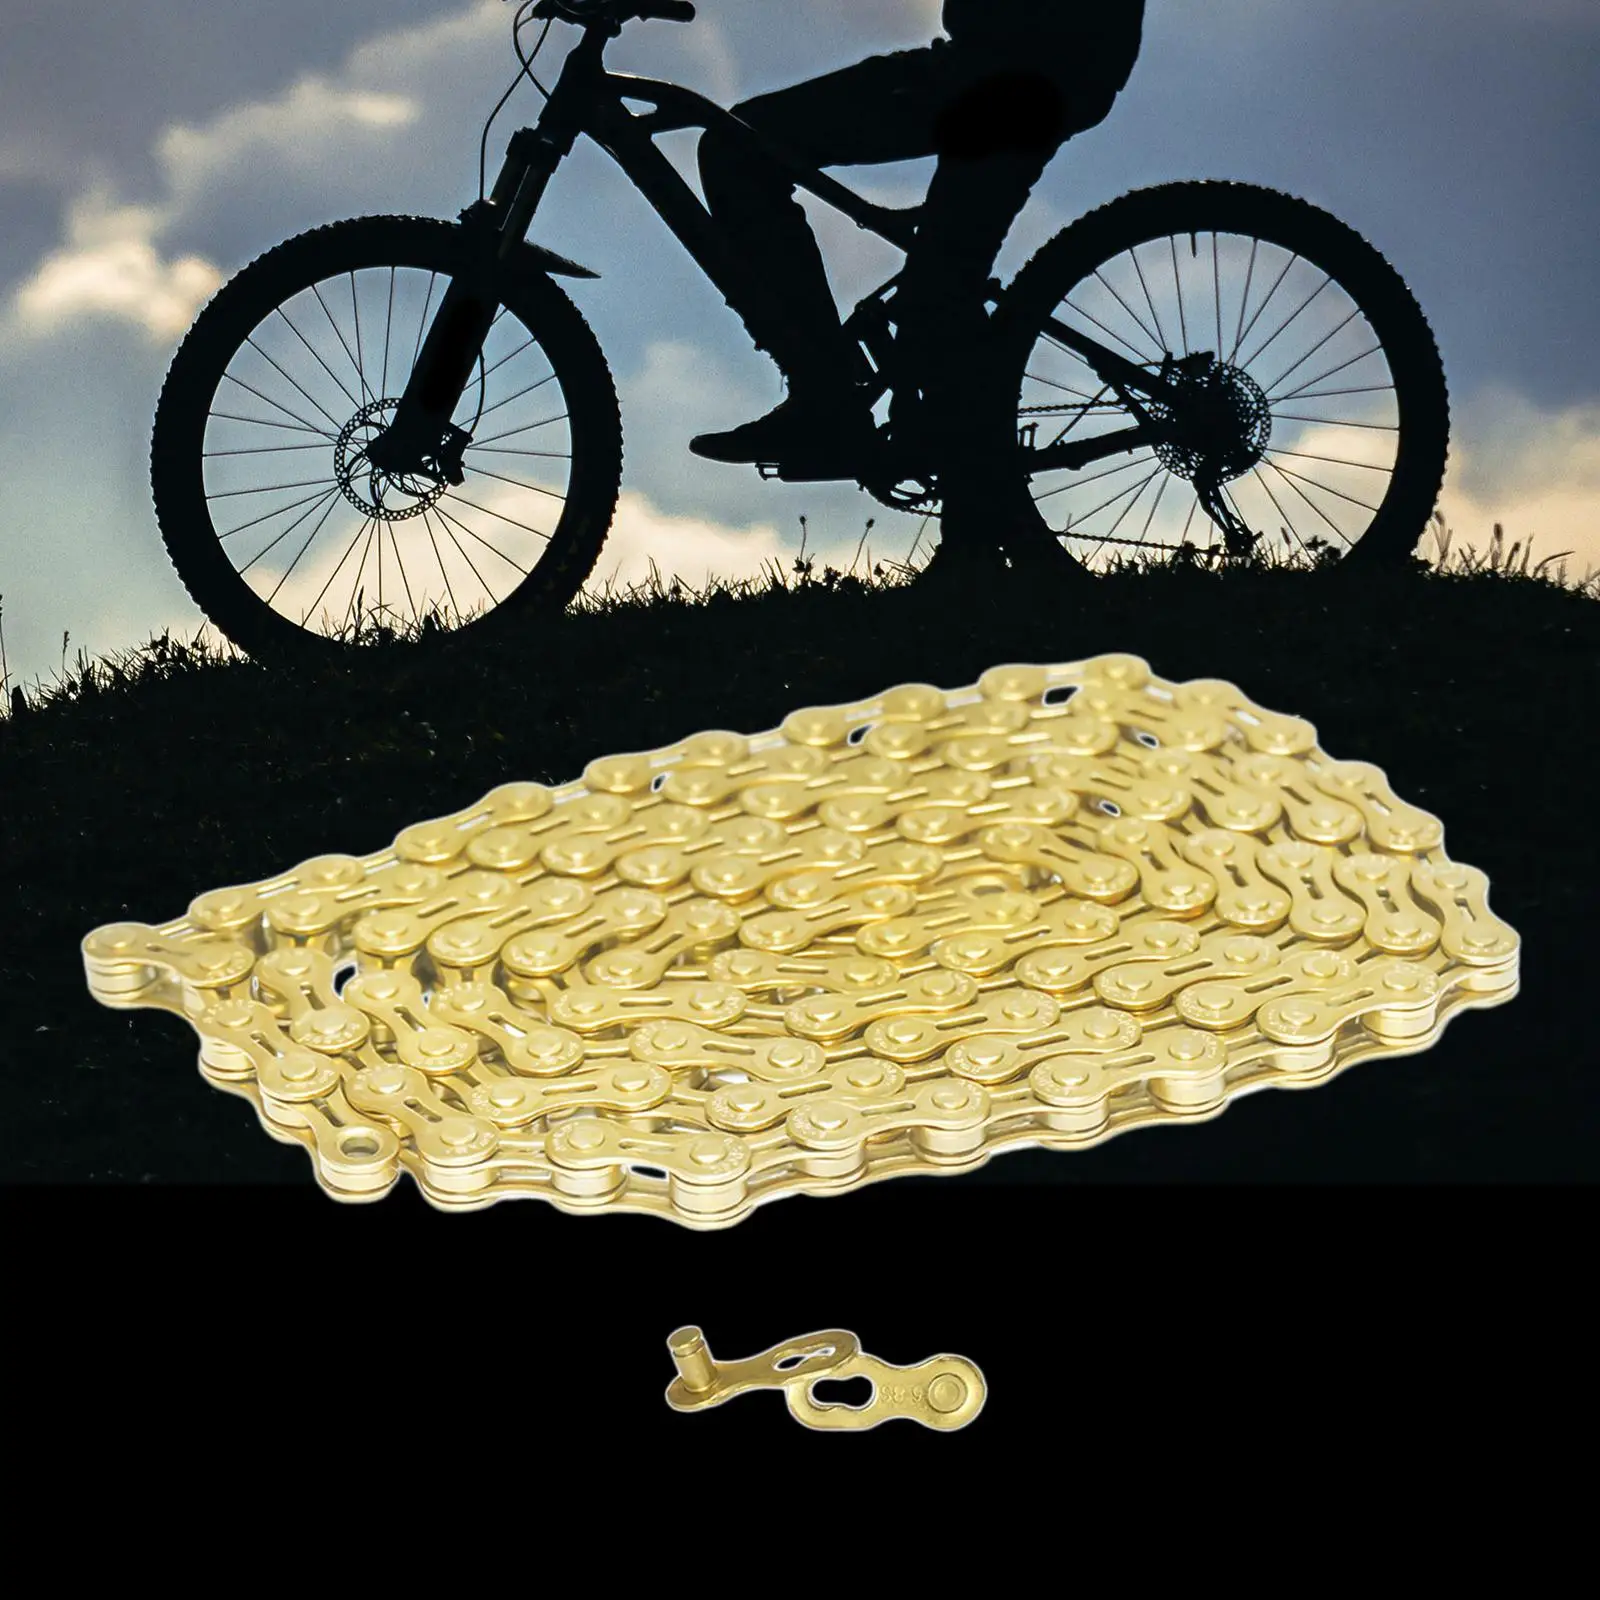 Bike Chain Half Hollow Chains 116 Sections Missing Link Connector Metal 8 Speeds Bicycle Chain for Mountain Bikes Accessories